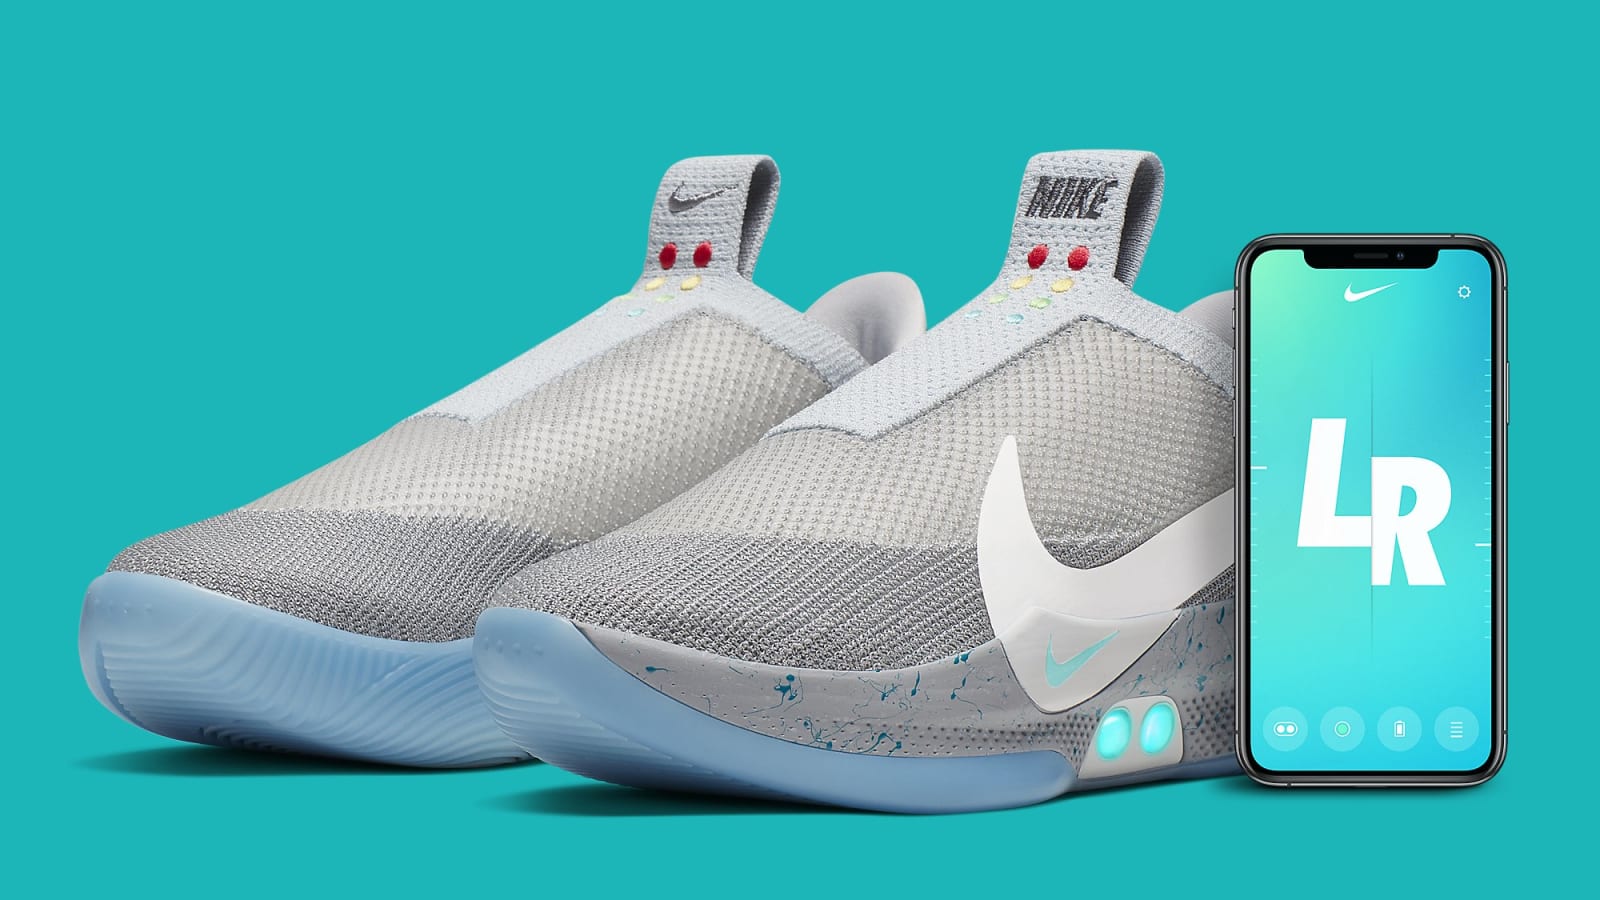 Nike Adapt BB Pays Homage To The Mag With New Colorway: Photos